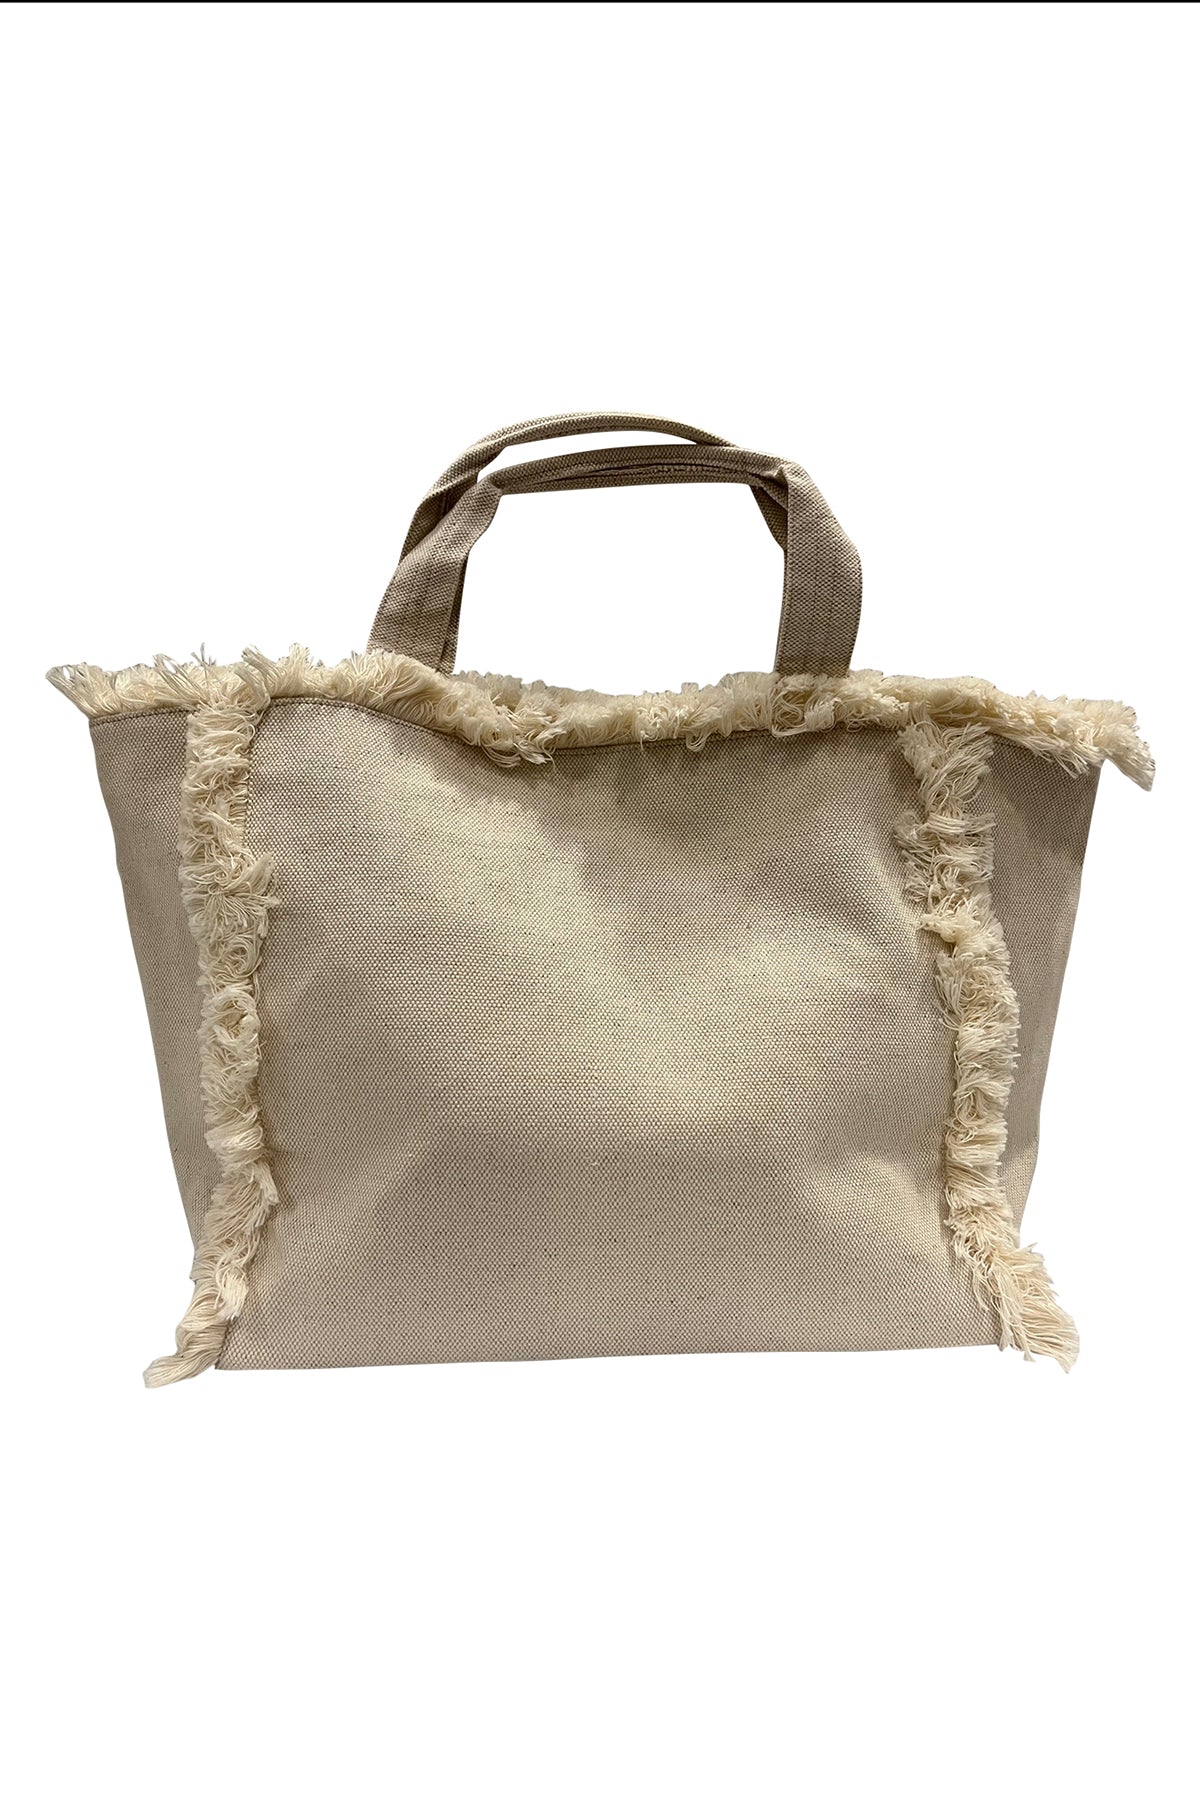 Launch Canvas Tote Natural-24285279453377